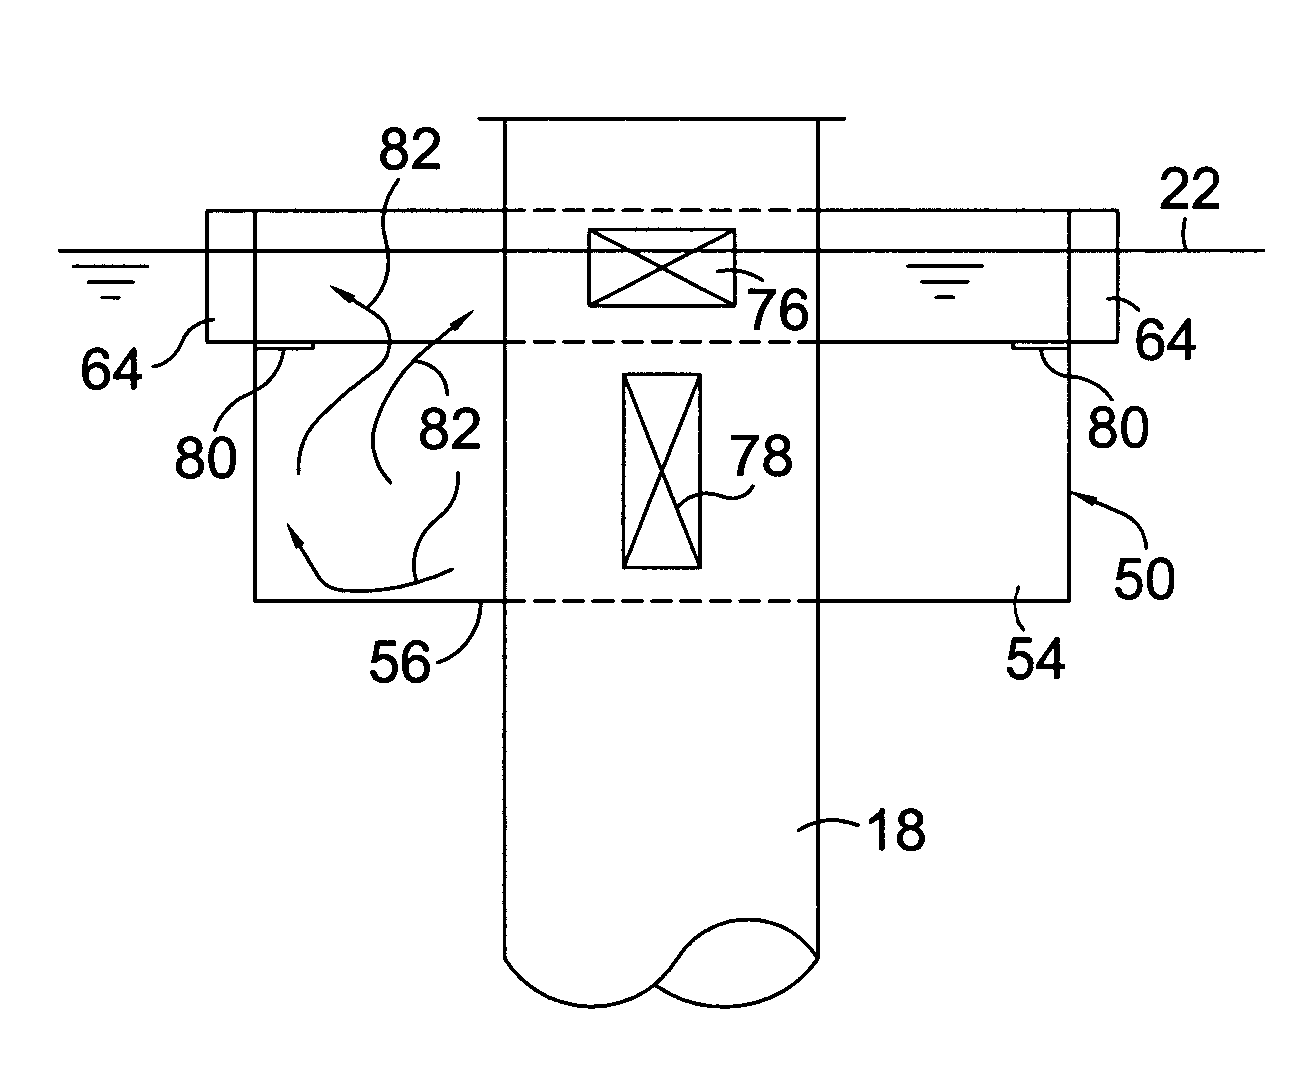 Inlet structure for clarifiers